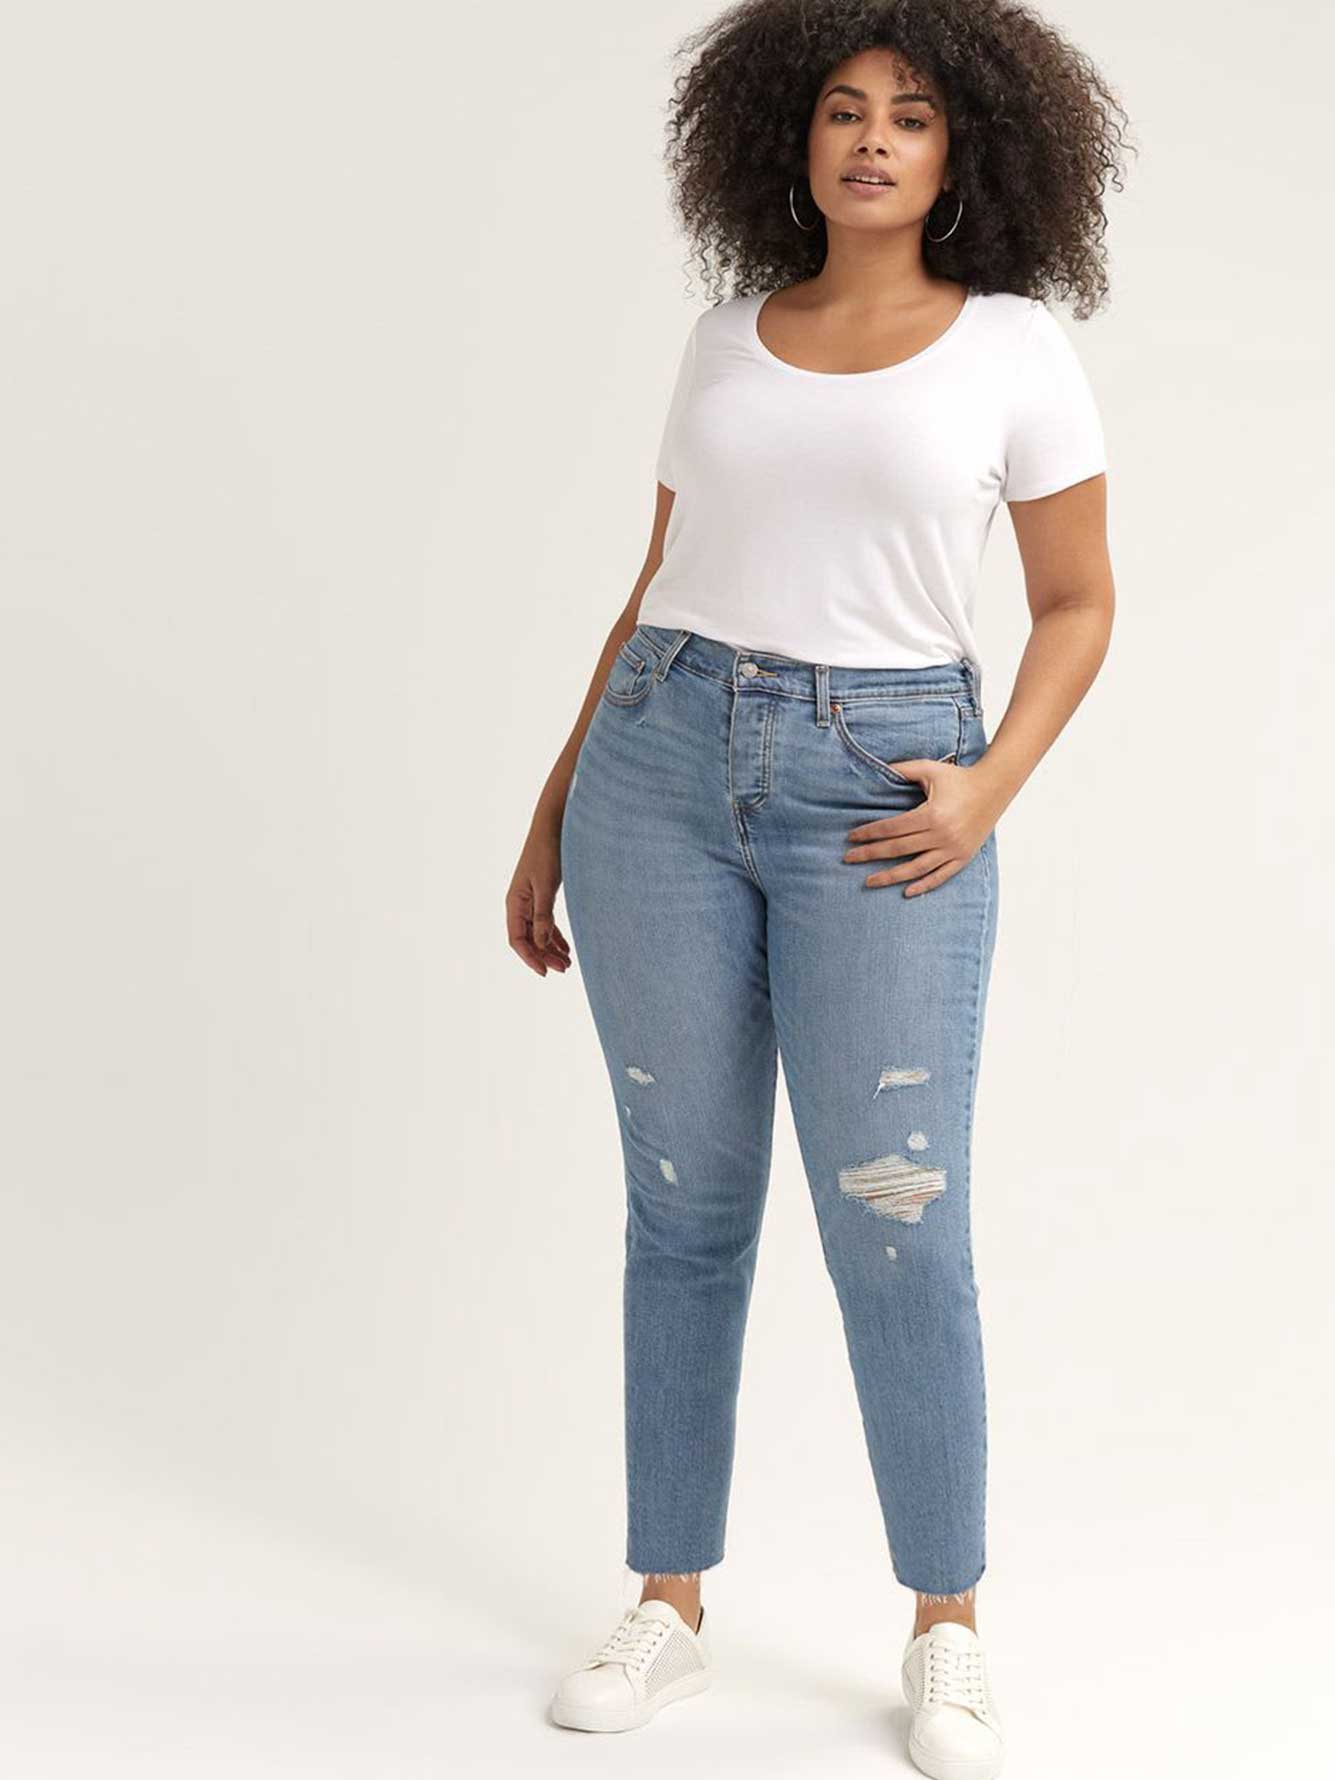 Stretchy Wedgie Skinny Jeans - Levi's | Penningtons